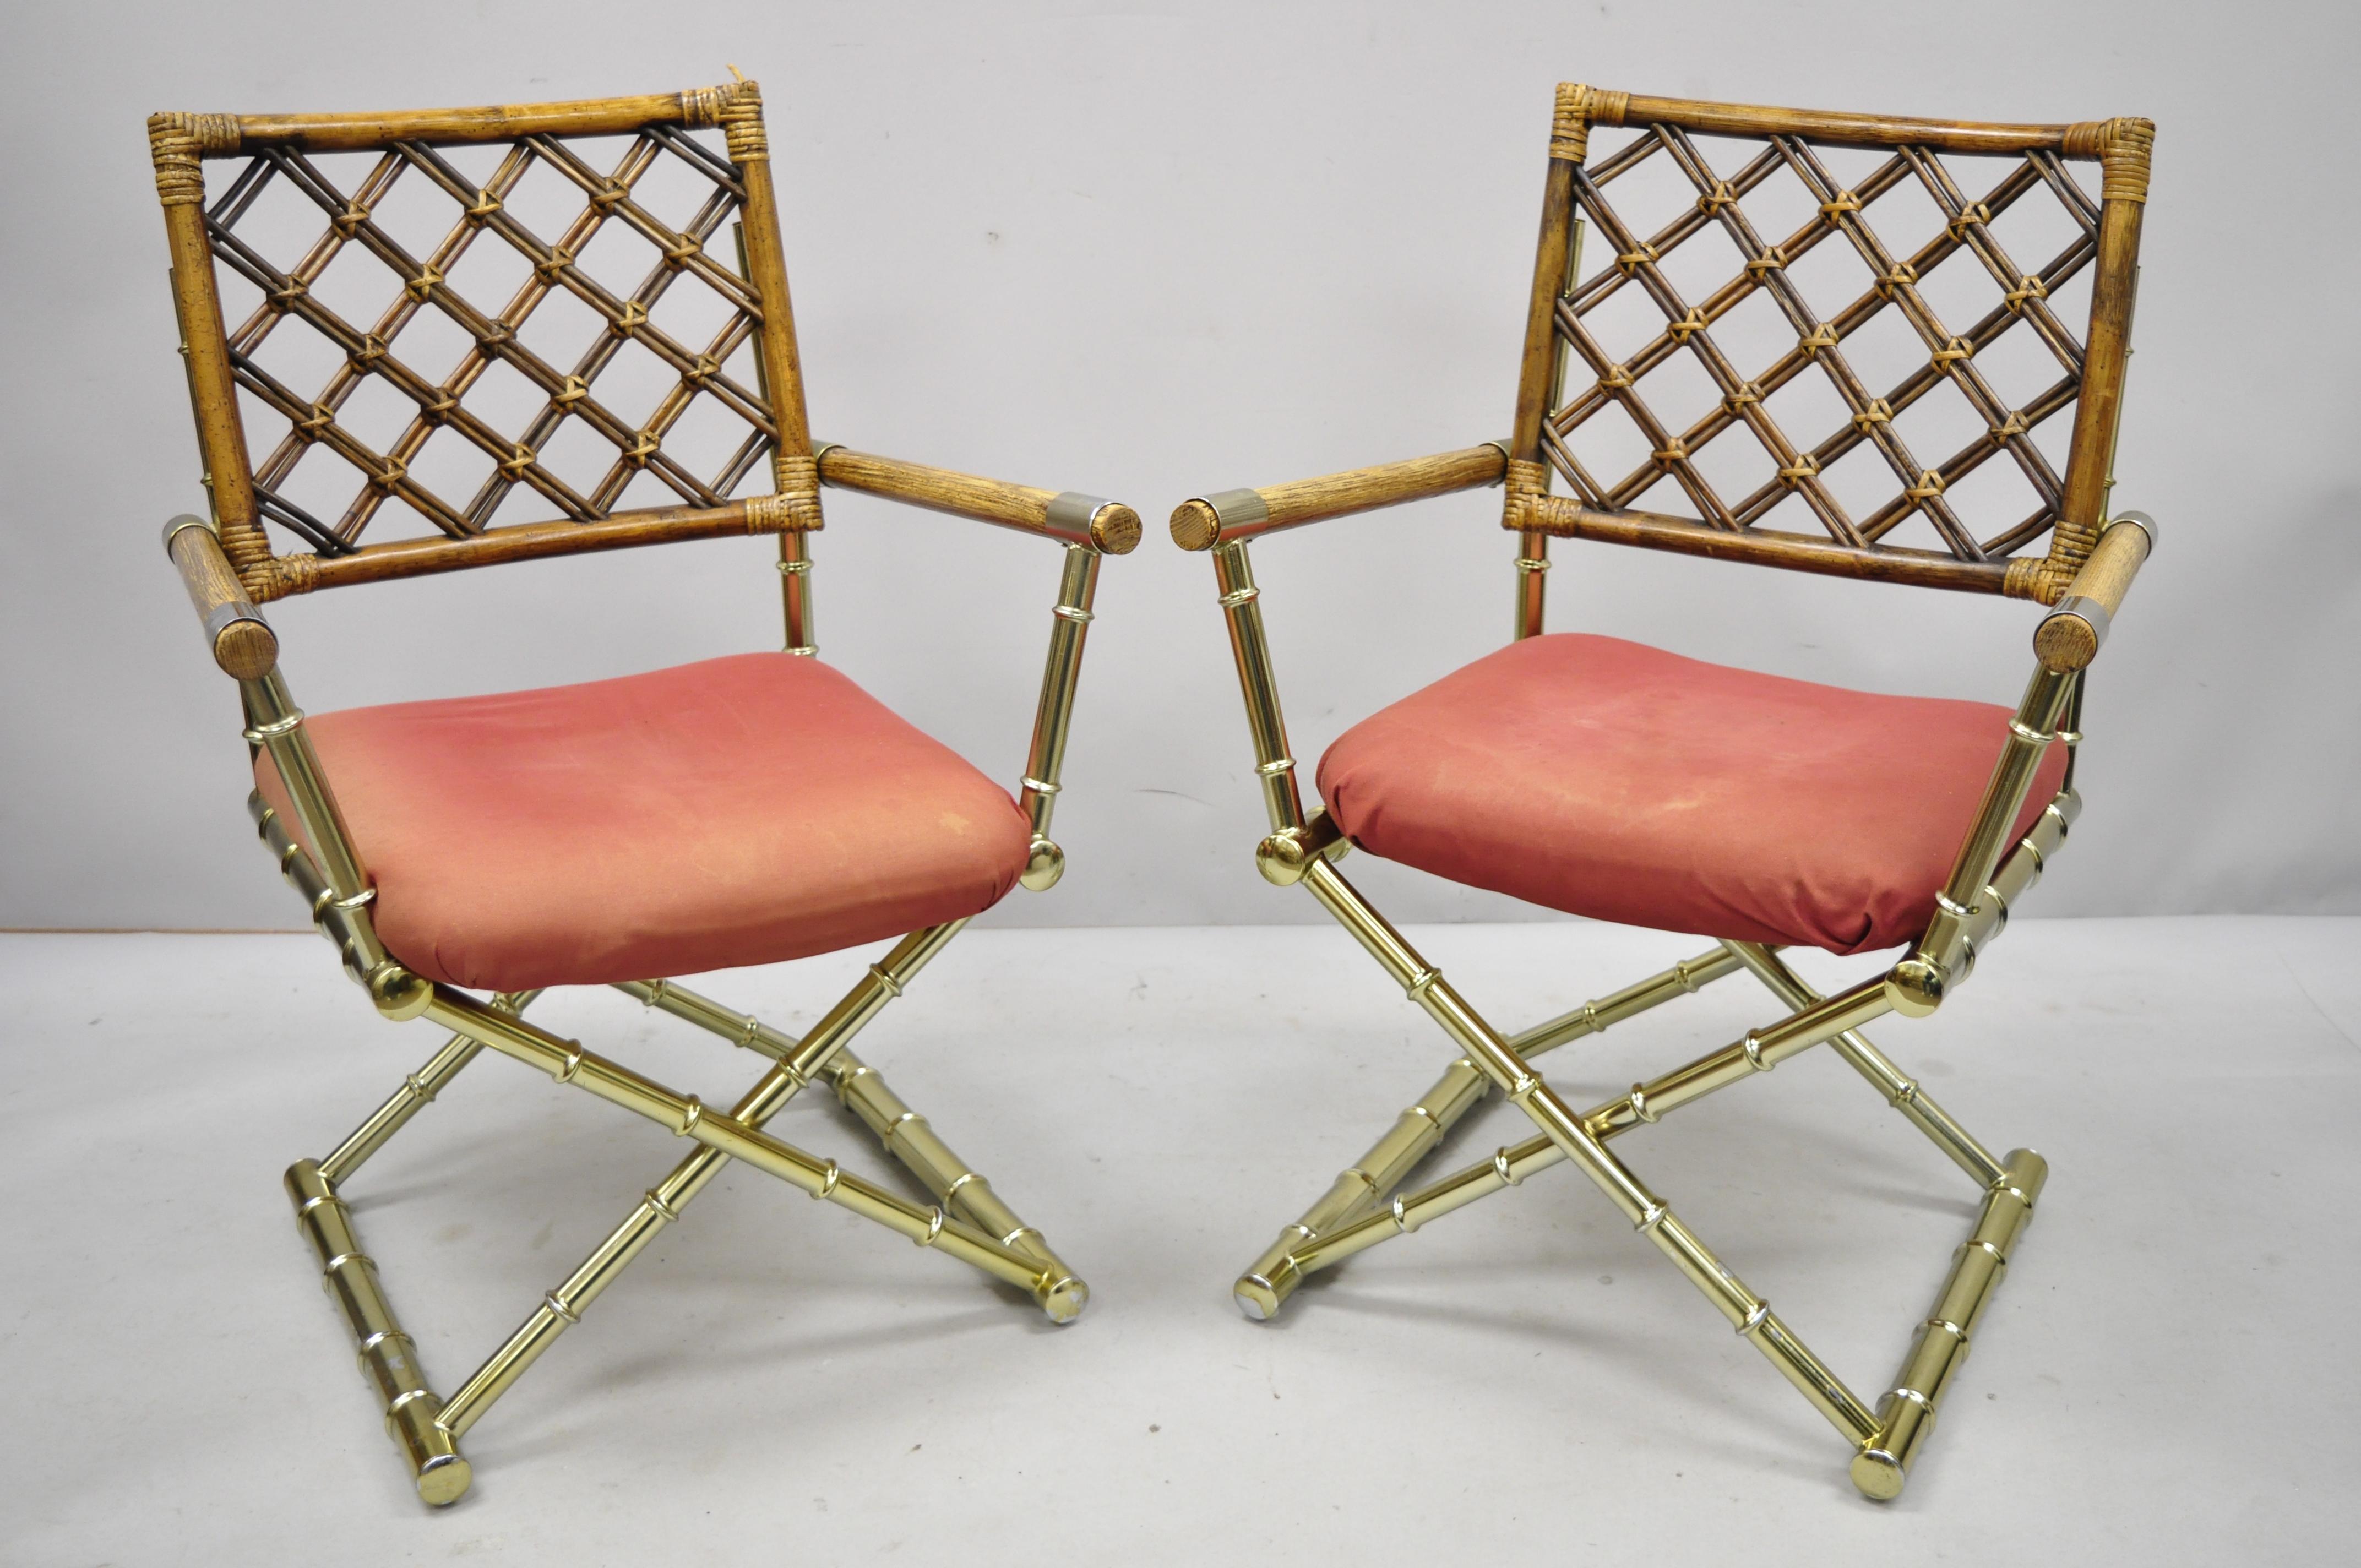 Pair of vintage Daystrom brass faux bamboo Lattice rattan Directors armchairs. Bamboo lattice back, brass plated metal X-form base, upholstered seat, great style and form, circa late 20th century. Measurements: 35.5